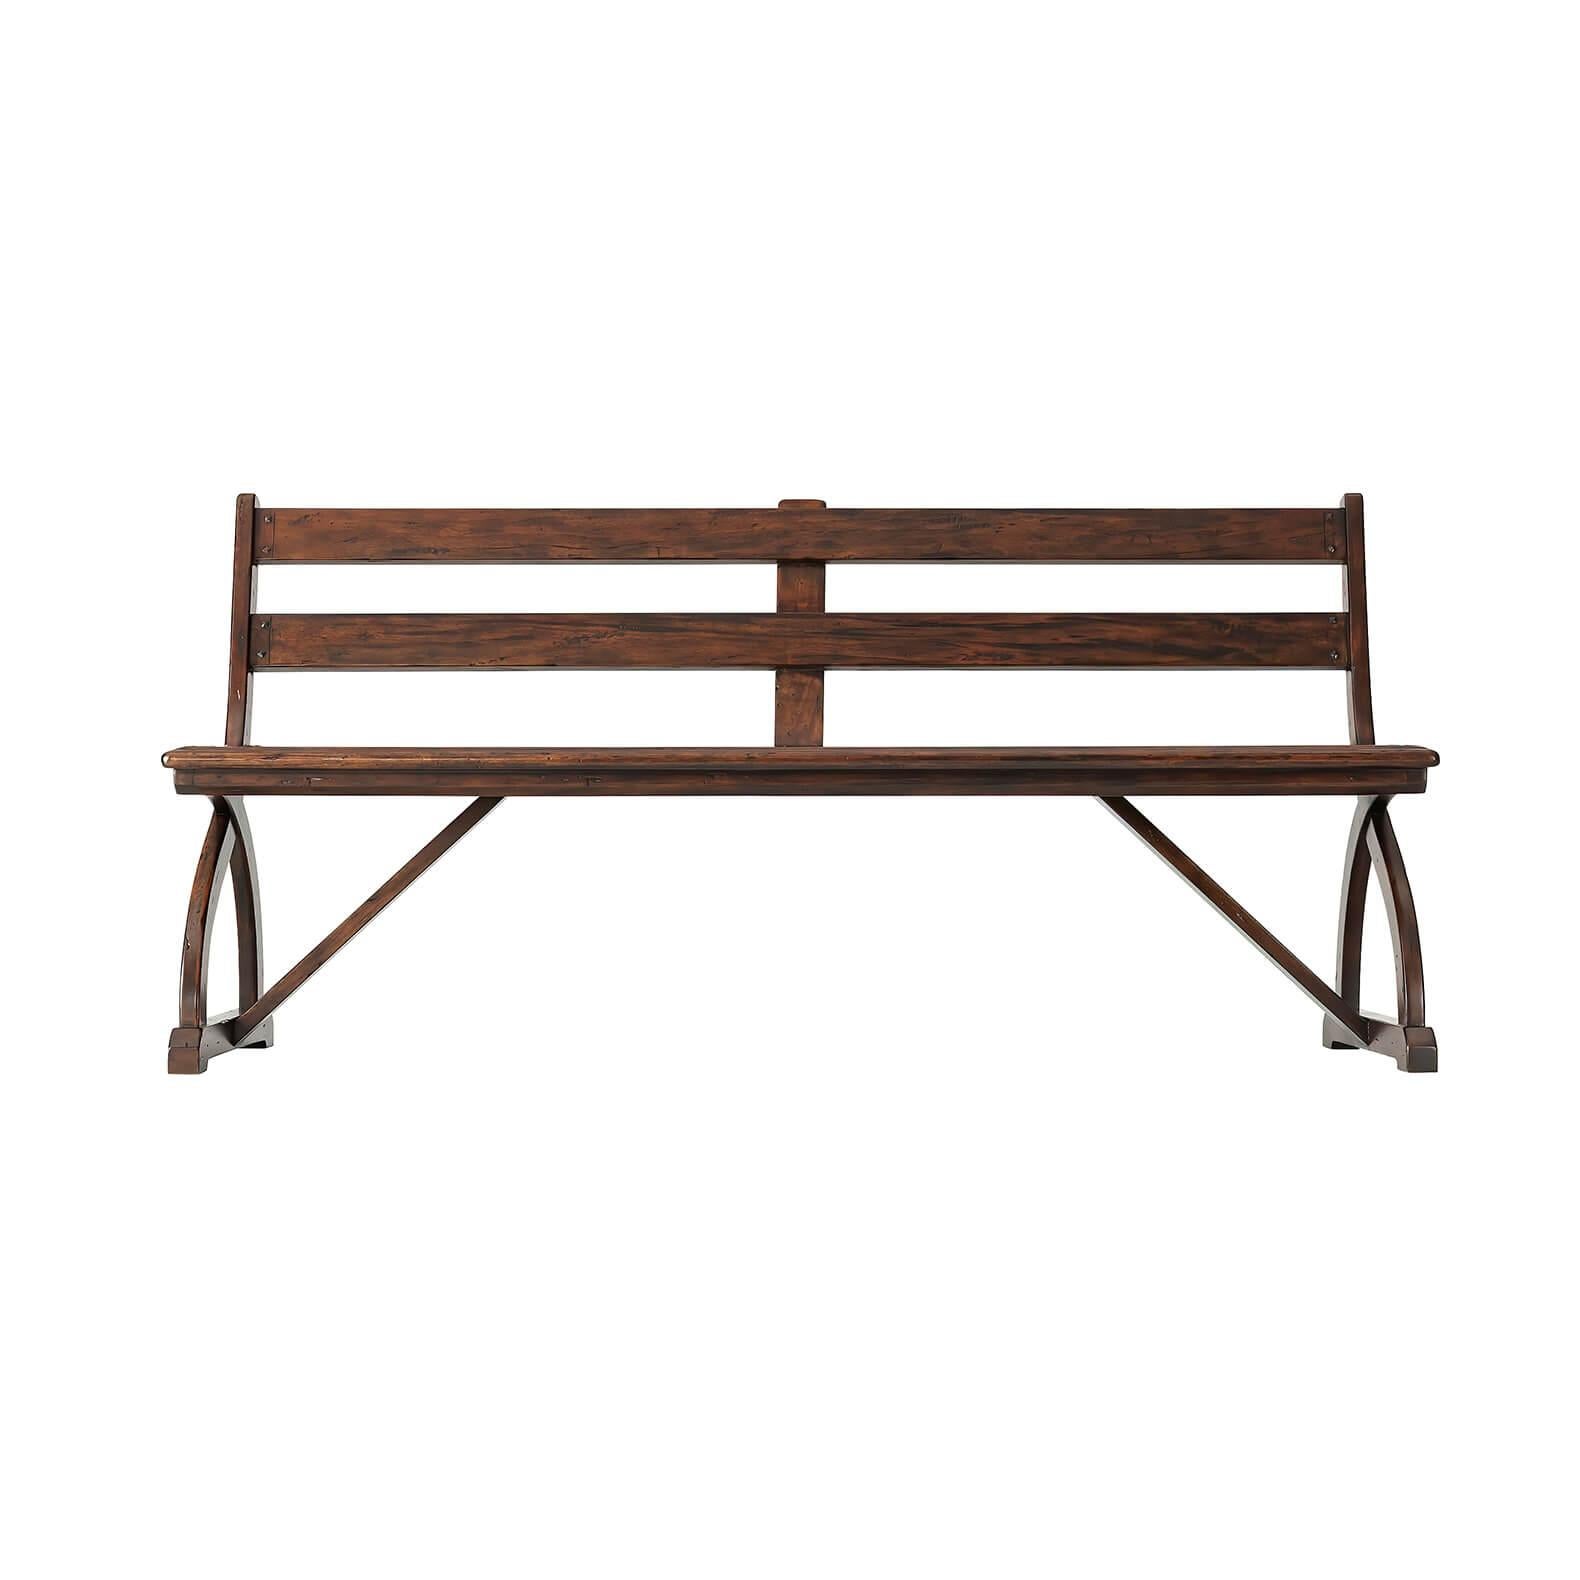 An English country antiqued mahogany bench, the slatted ladder back above a planked seat with a molded edge, on wishbone supports with sleigh bases and stretcher supports. Inspired by a 17th century original.
Dimensions: 72